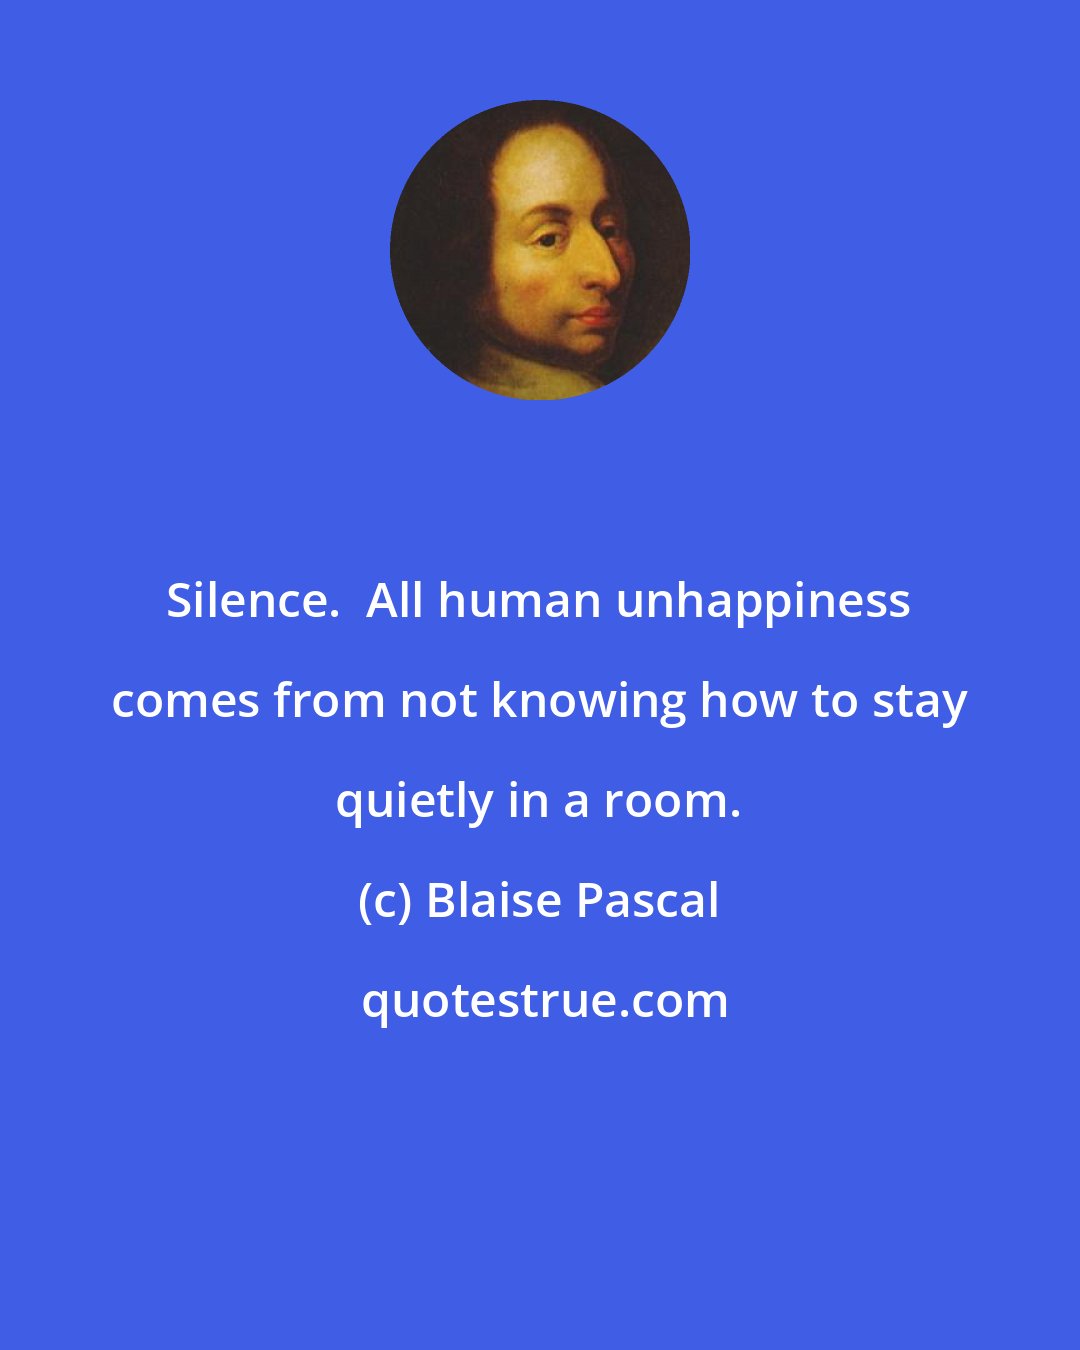 Blaise Pascal: Silence.  All human unhappiness comes from not knowing how to stay quietly in a room.